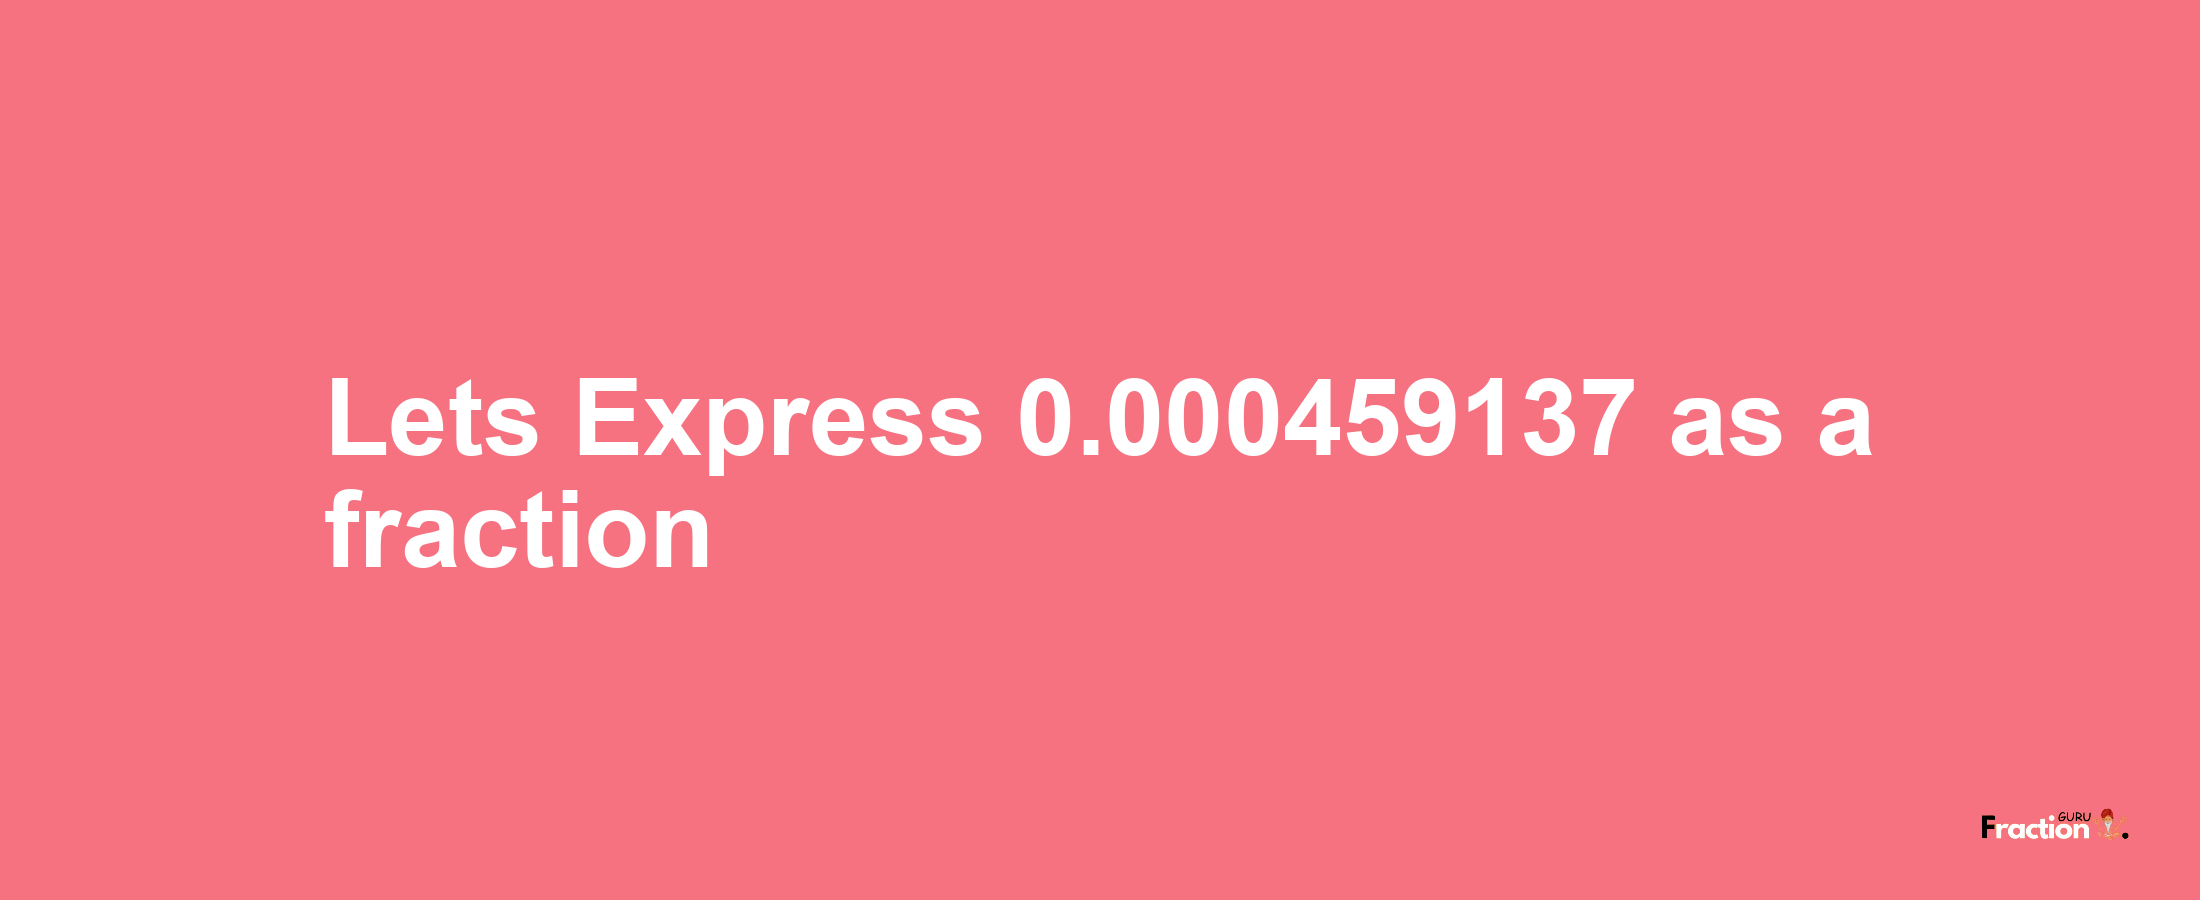 Lets Express 0.000459137 as afraction